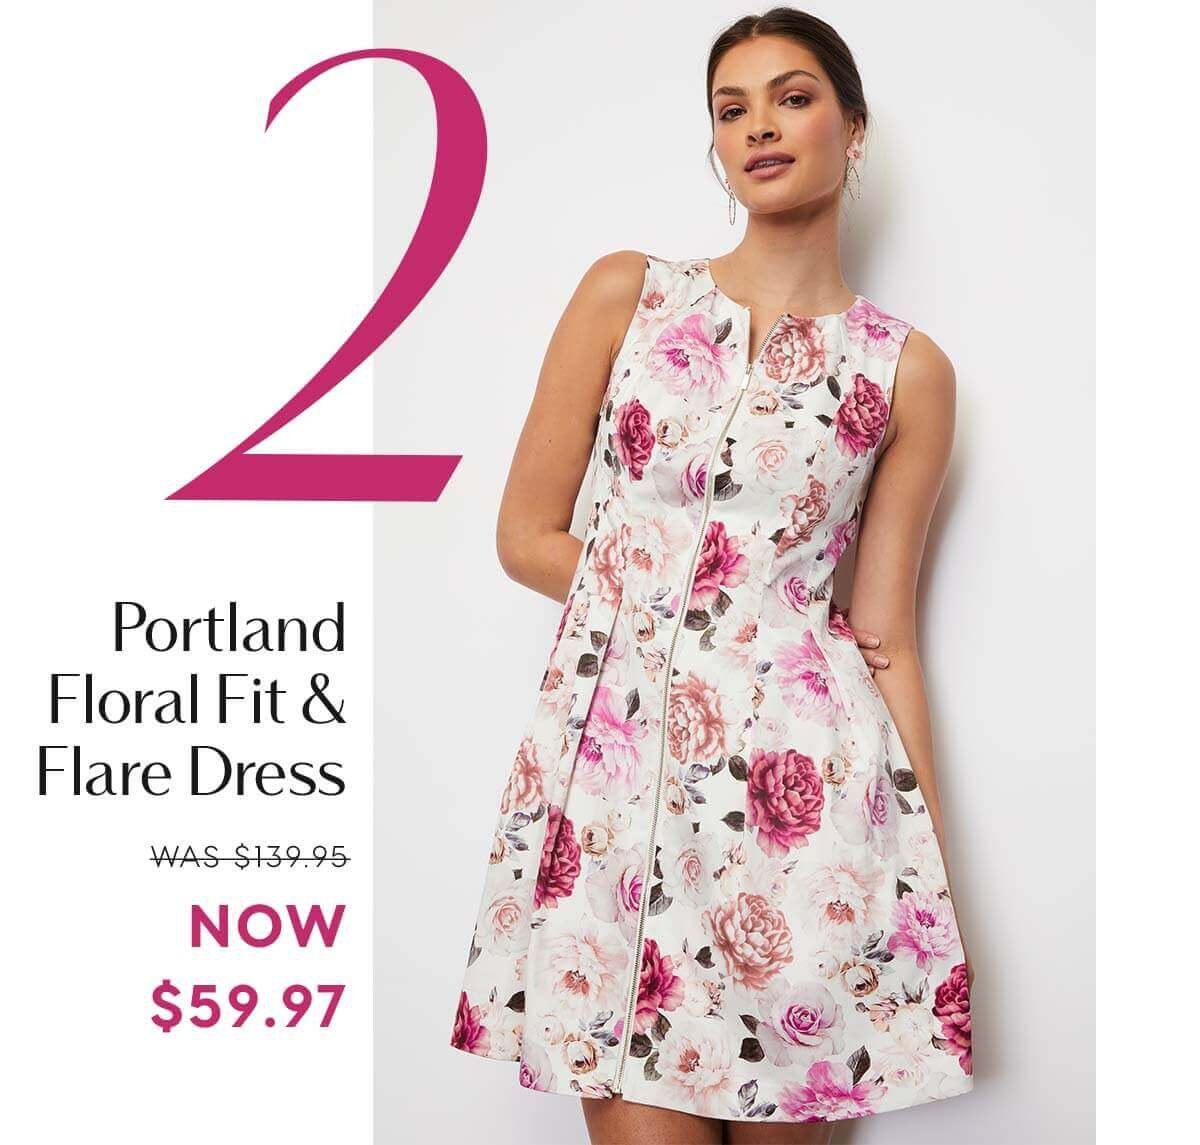 2. Portland floral fir and flare dress was $139.95 now $59.97